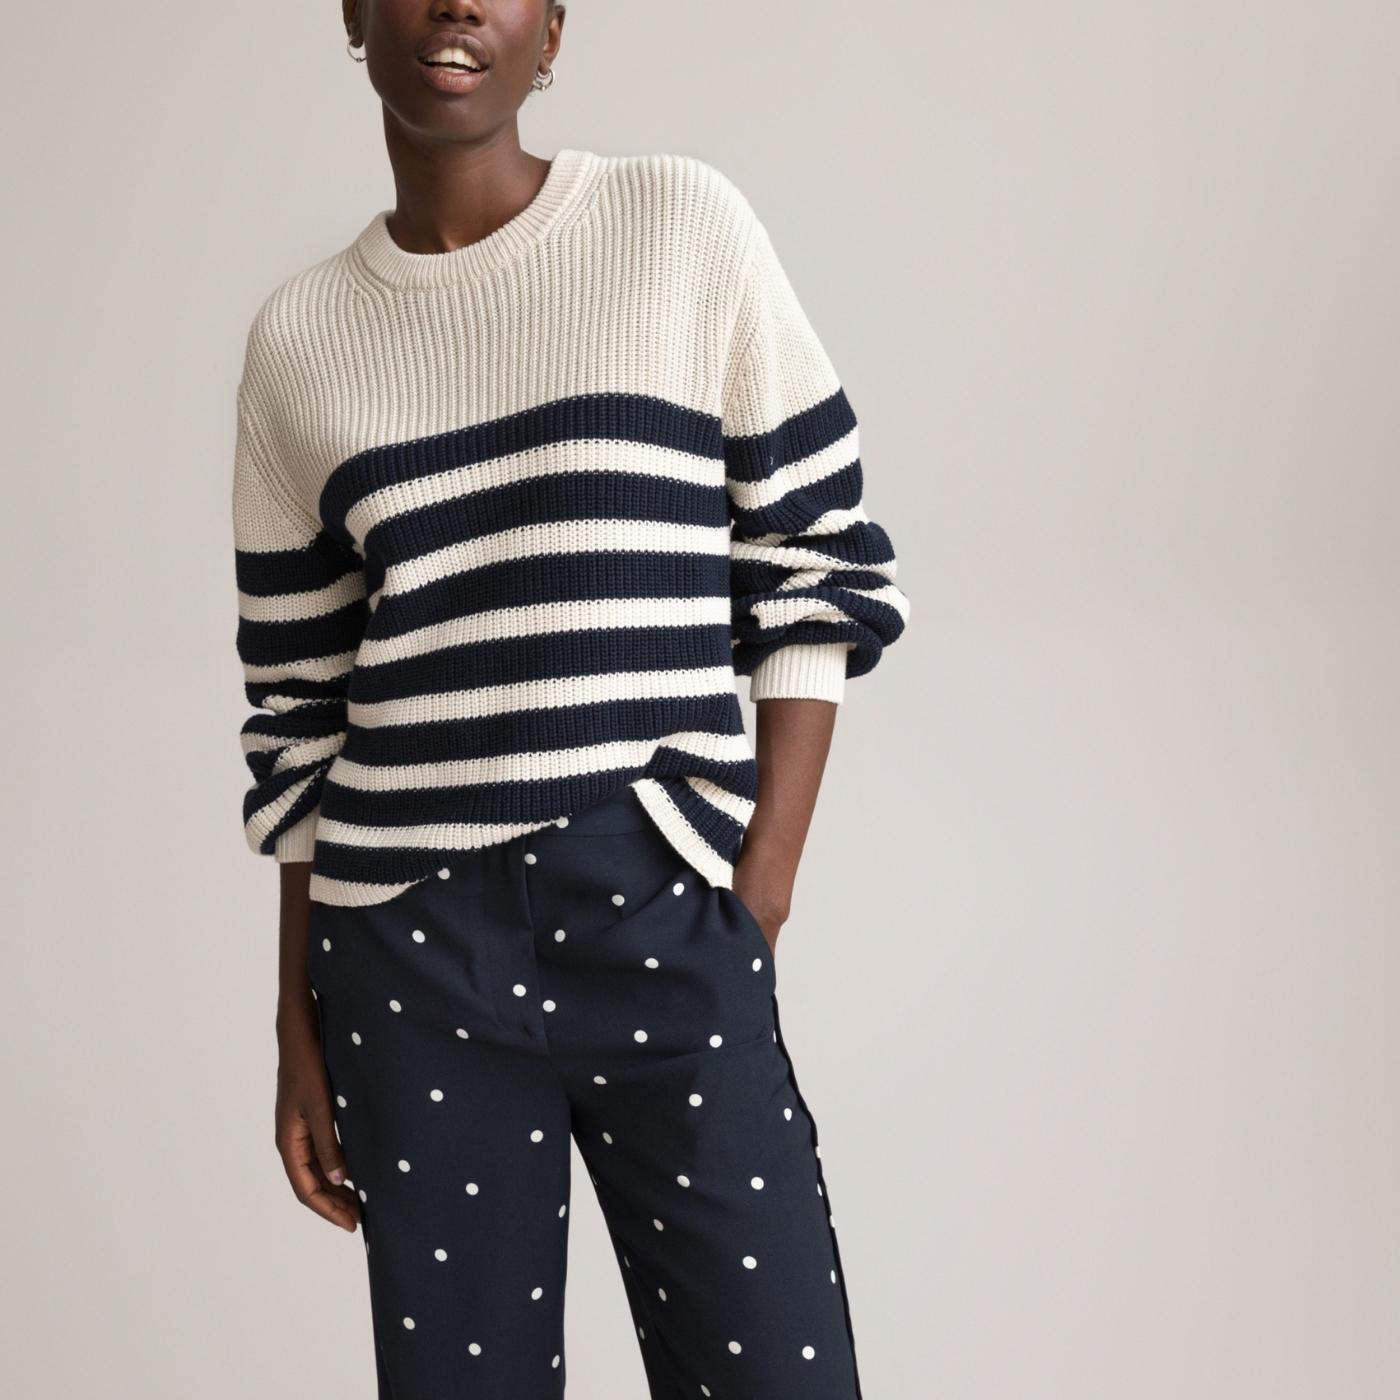 Must have knitwear for Autumn | La Redoute